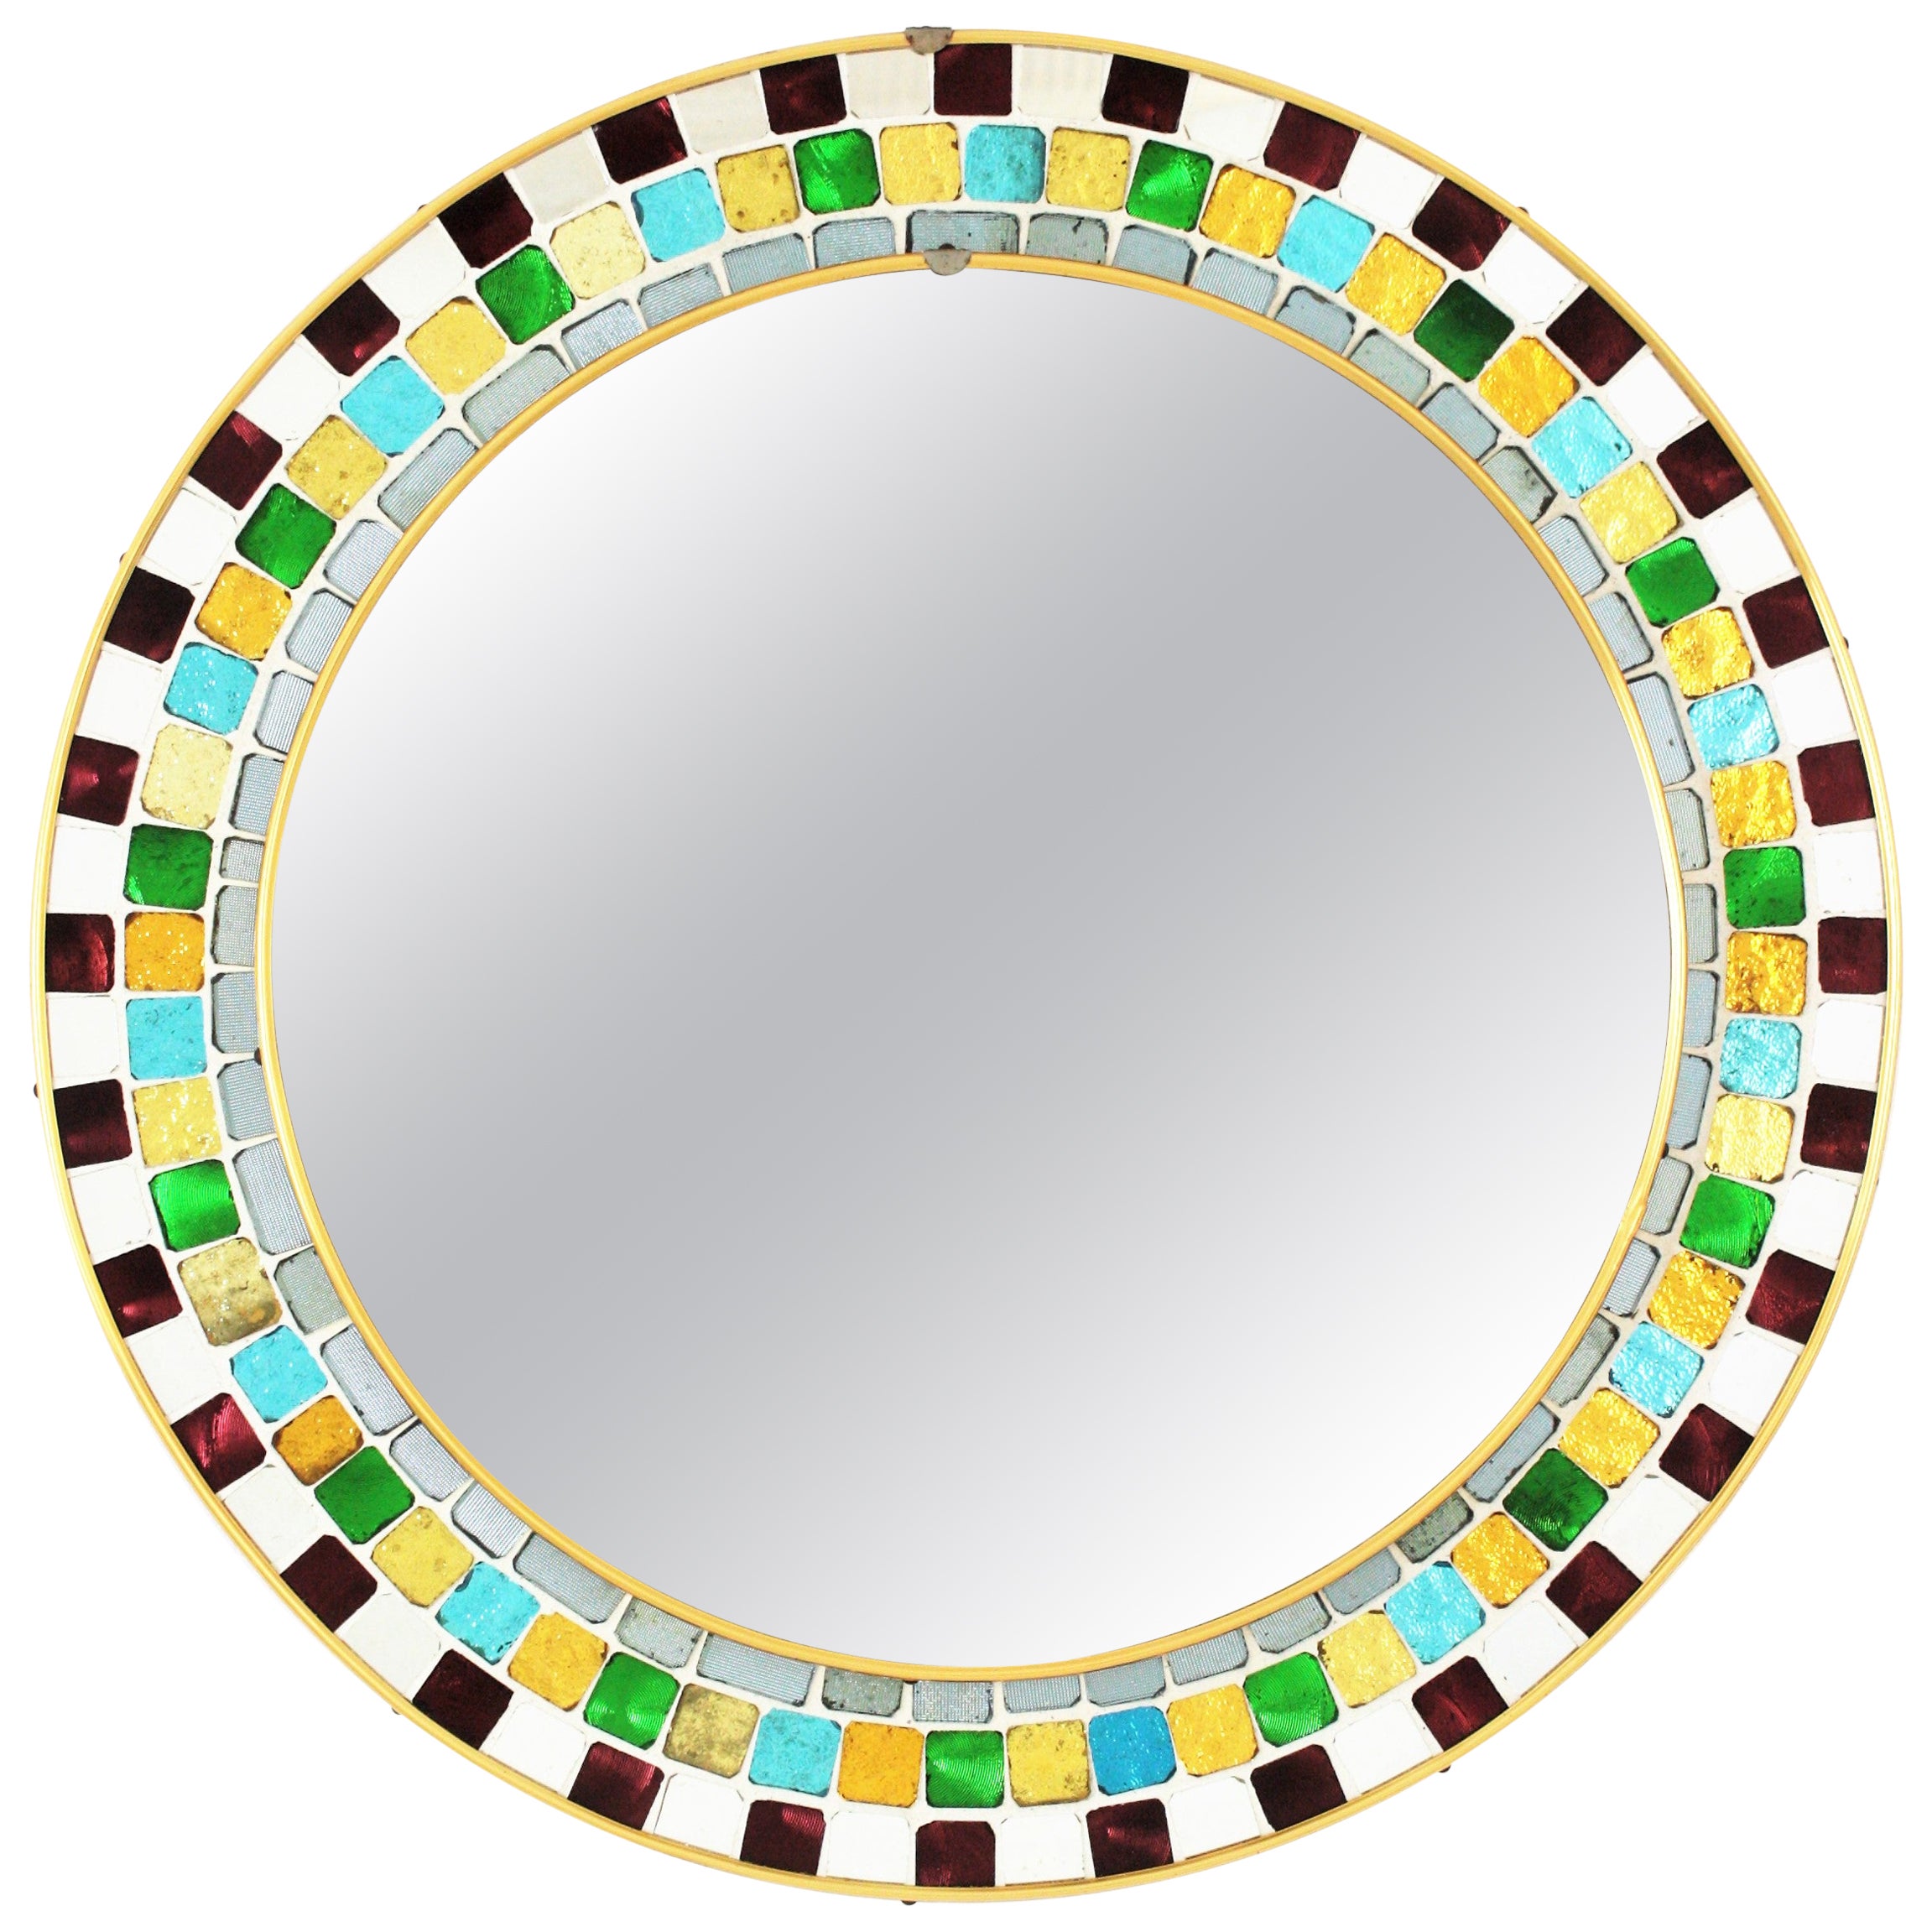 Midcentury Round Mirror with Multi Color Glass Mosaic Frame 